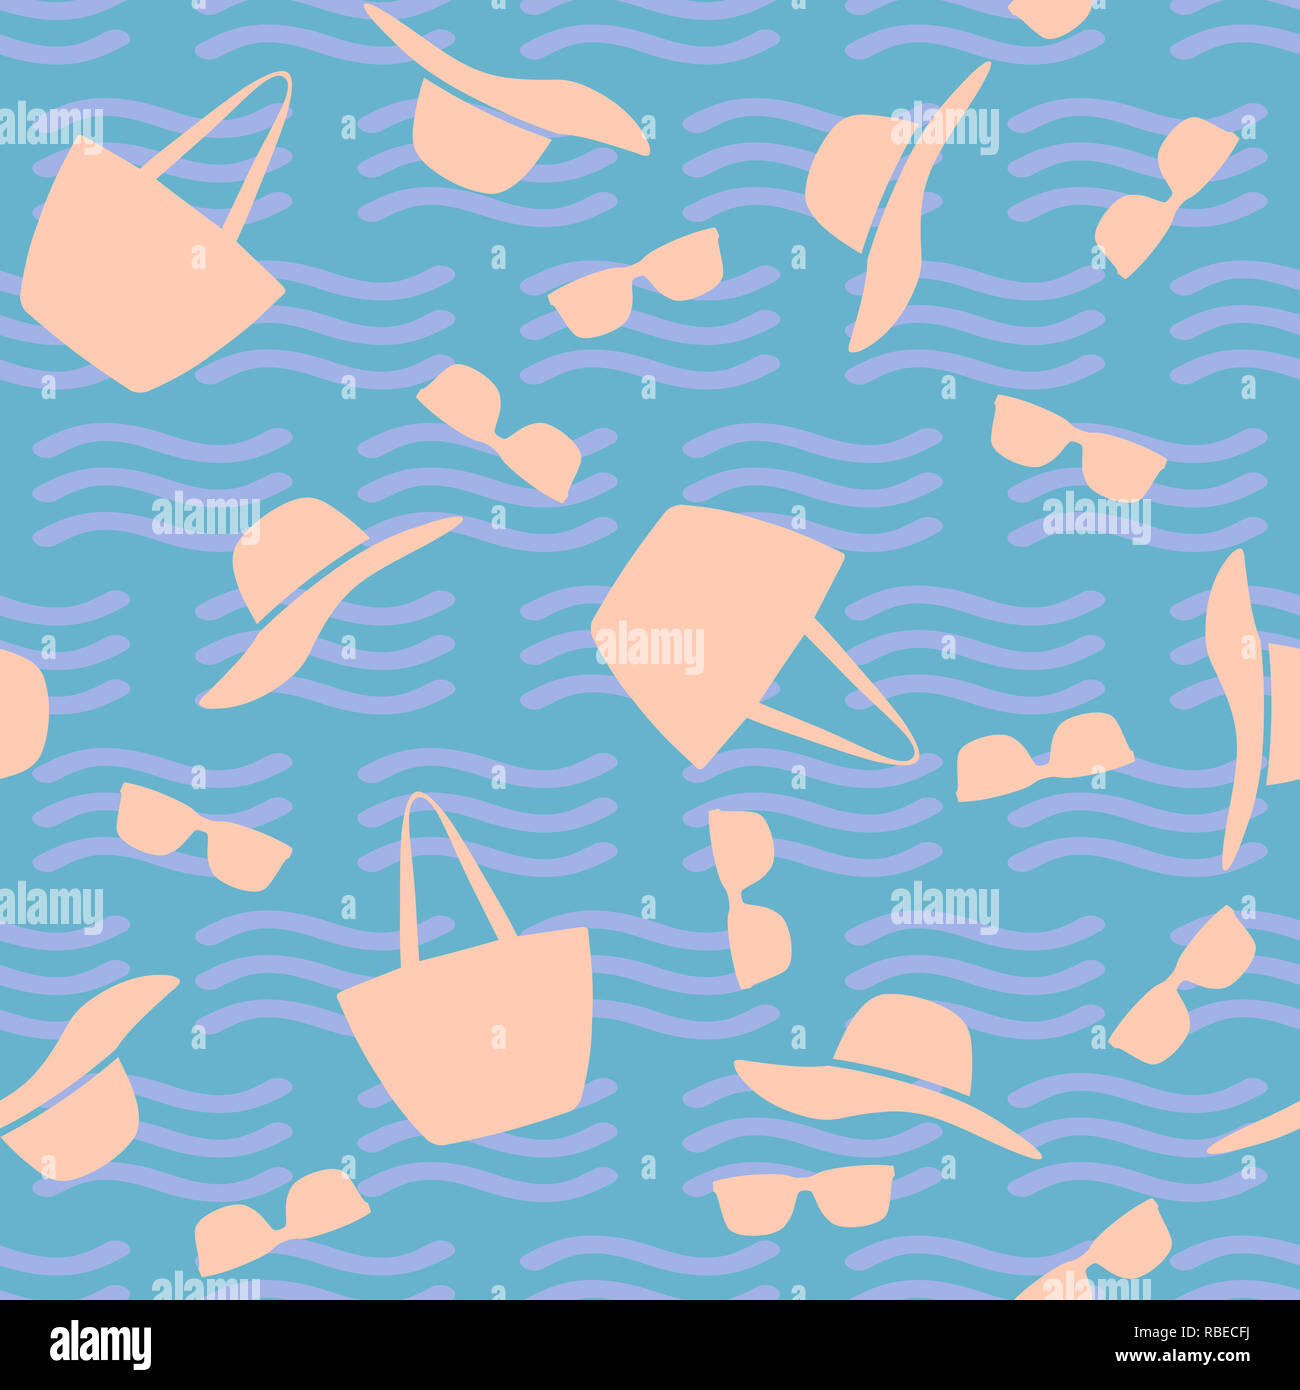 Seamless beach pattern with ladies accessories Stock Photo